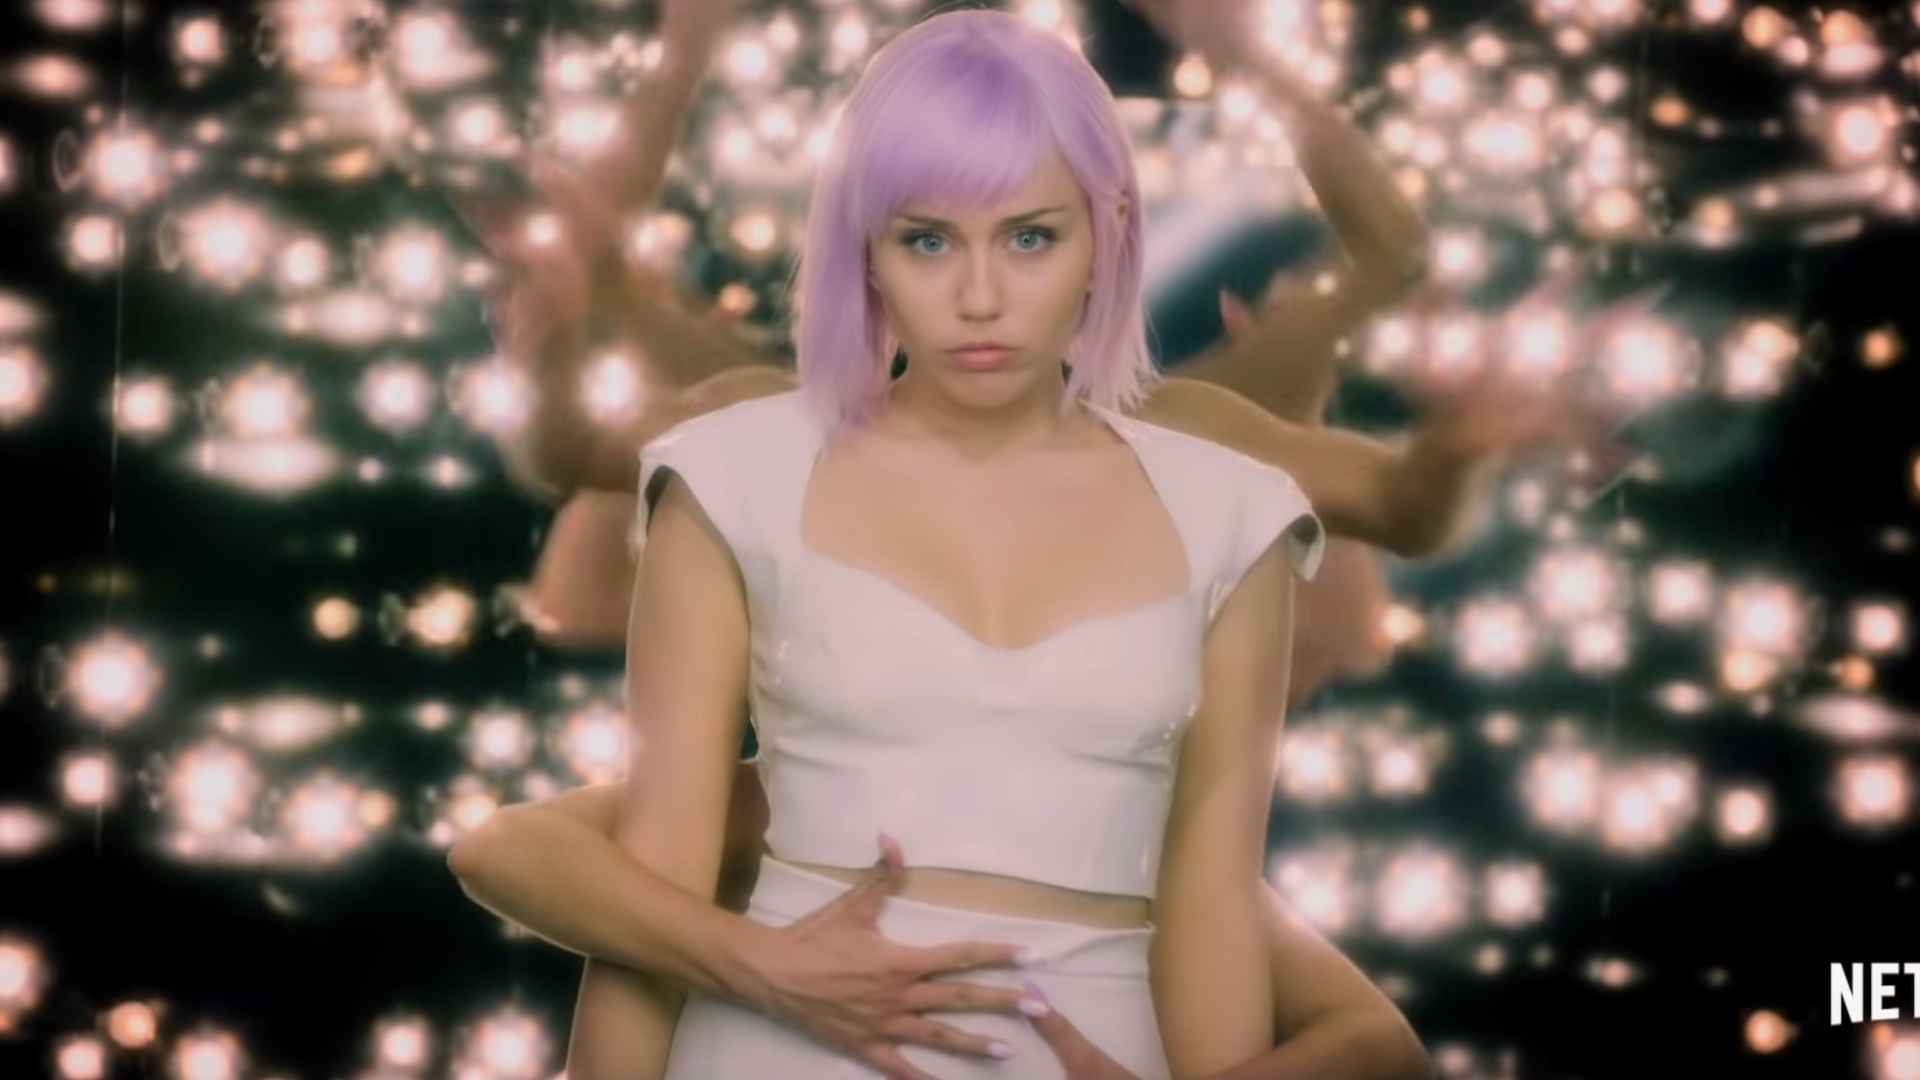 The Trailer For Black Mirror Season Has Arrived With Miley Cyrus